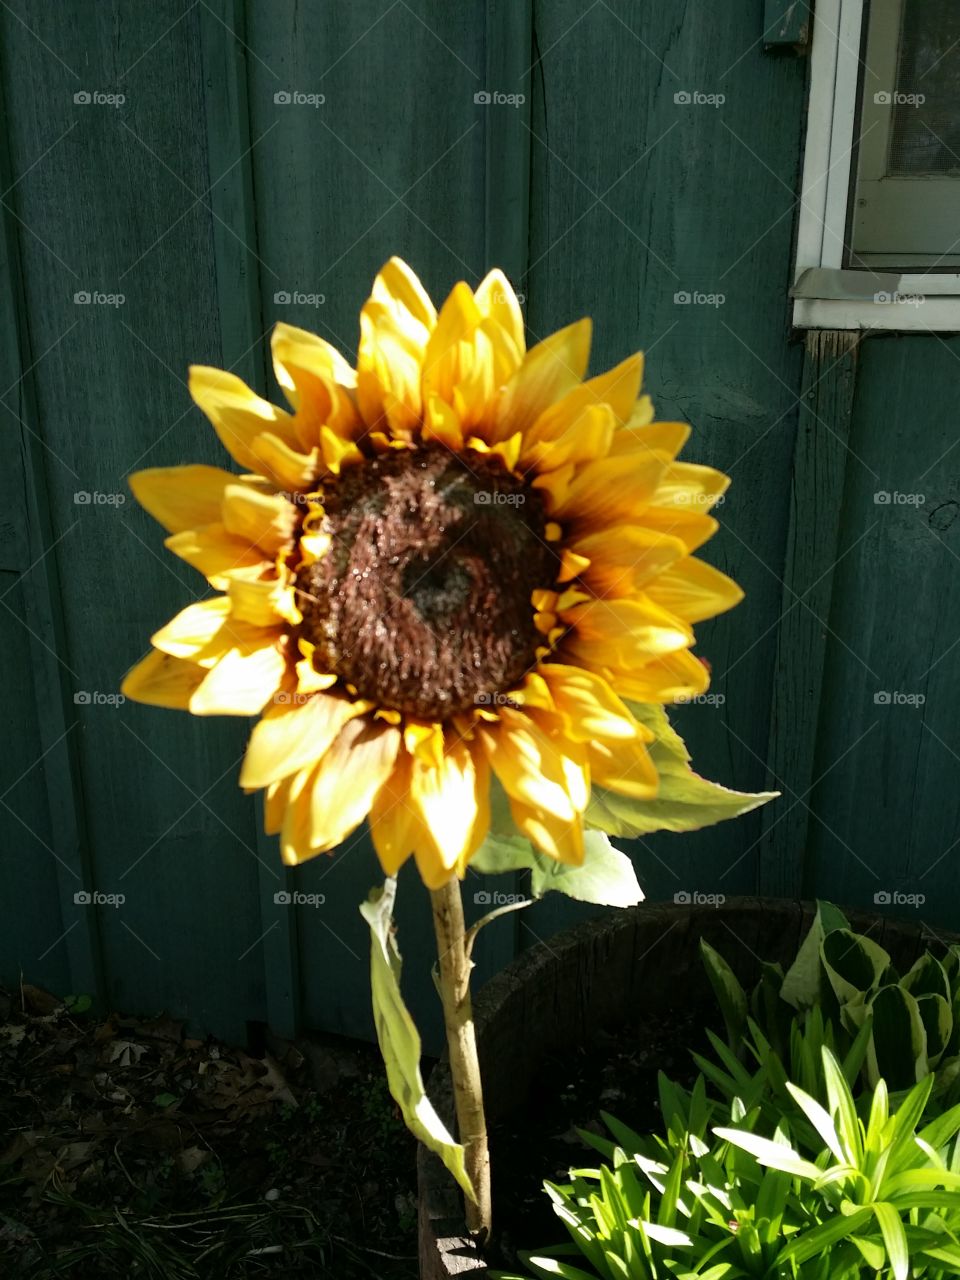 grandpa sunflower. he already have this growing